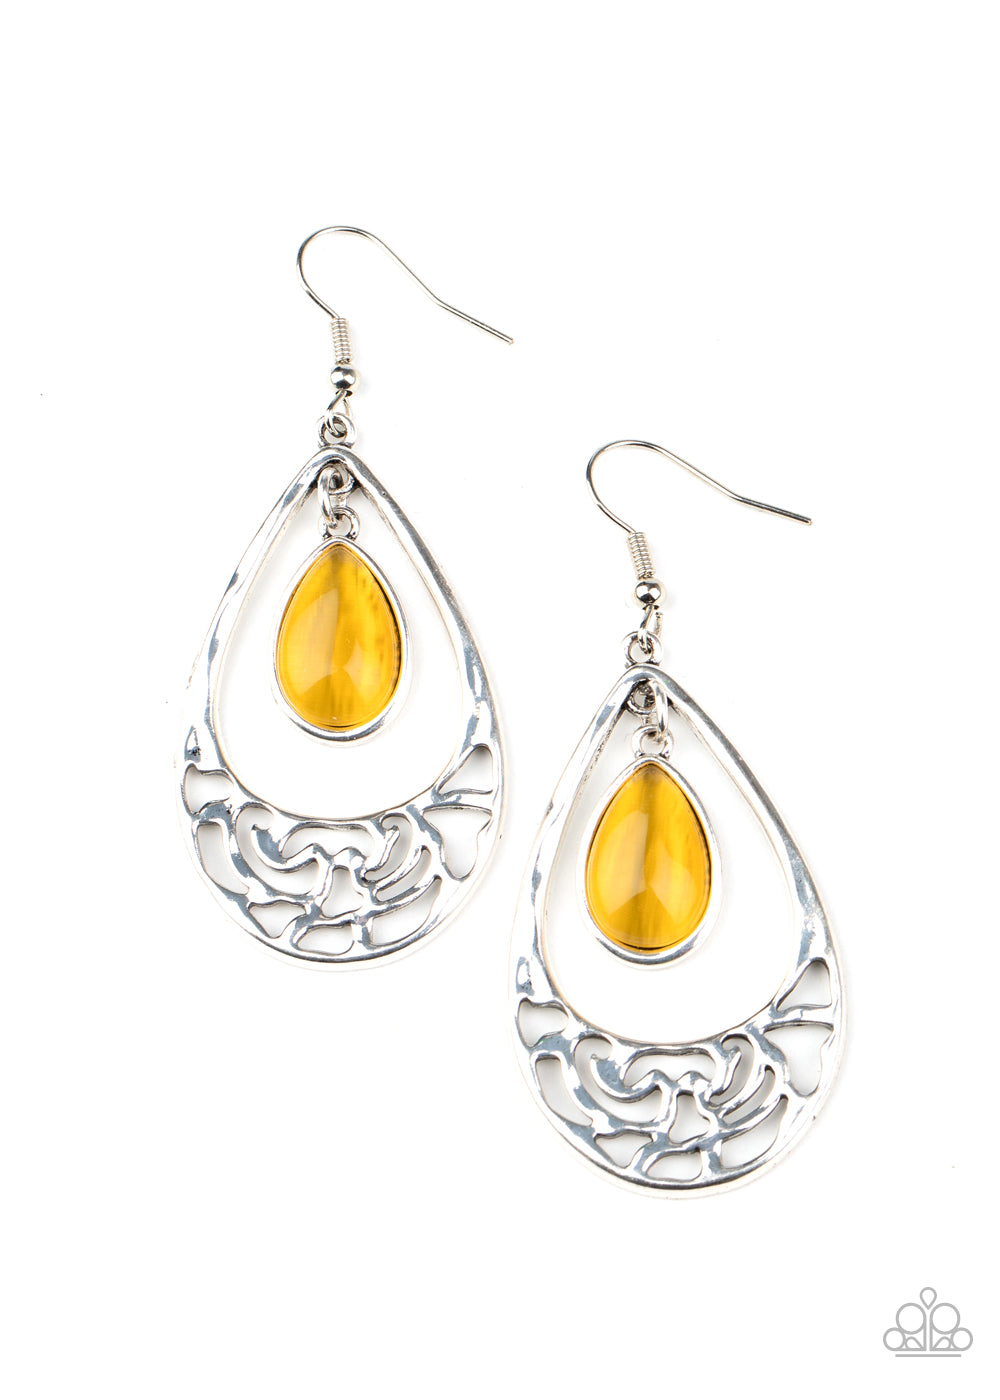 &lt;P&gt;A dewy yellow cat\&#039;s eye teardrop swings from the top of a shimmery silver teardrop frame that features whimsical floral filigree detail. Earring attaches to a standard fishhook fitting.&lt;/P&gt;  

&lt;P&gt; &lt;I&gt;  Sold as one pair of earrings. &lt;/I&gt;  &lt;/P&gt;

&lt;img src=\&quot;https://d9b54x484lq62.cloudfront.net/paparazzi/shopping/images/517_tag150x115_1.png\&quot; alt=\&quot;New Kit\&quot; align=\&quot;middle\&quot; height=\&quot;50\&quot; width=\&quot;50\&quot;/&gt;